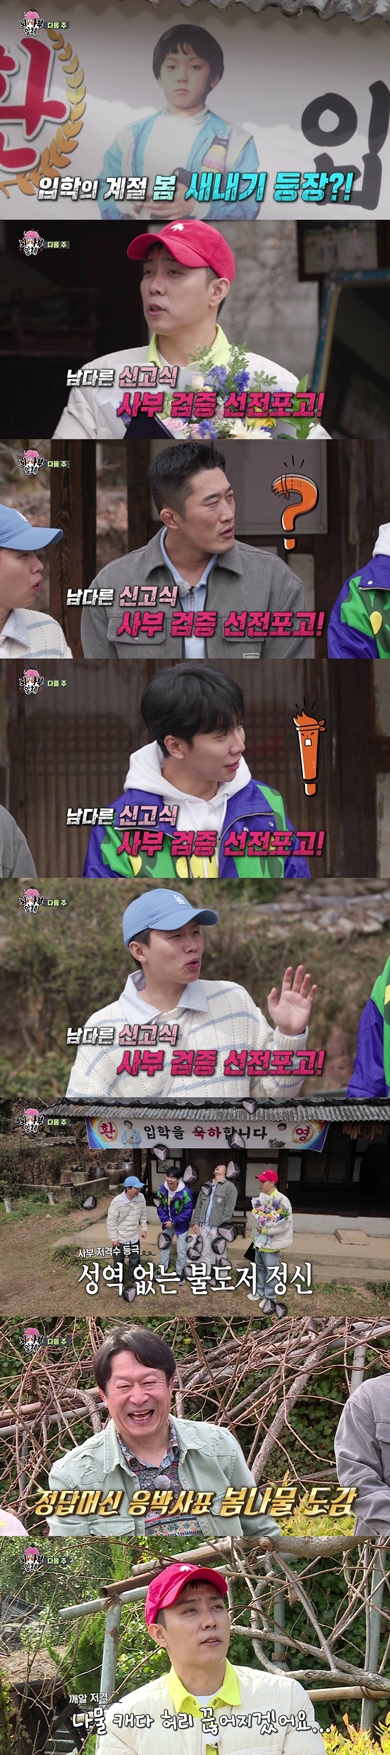 Eun Ji-won will enter SBS All The Butlers.Eun Ji-won will join SBS All The Butlers which will be broadcasted at 6:30 pm on April 17th.In the preliminary video released before the broadcast, Eun Ji-won was drawn to the new youngest.Lee Seung-gi, who is best friend of the appearance of Eun Ji-won, said, Why is my brother a person who does not have the will to learn?Eun Ji-won laughed with an unexpected comment, saying, I am going to test the master.Lee Seung-gi laughed, saying, I wonder what direction All The Butlers will flow.In fact, Eun Ji-won said that he heard the shooting scene as a master sniper with his frank and unassuming gesture.Attention is focusing on what Eun Ji-won, who has walked the path of Manhakdo, will show in All The Butlers.On the other hand, Kim Eung-soo, a famous actor, such as Ask and go to double! And Mapo Bridge is collapsed, will appear as masters.Kim Eung-soo is a romantic spring master and will give a special time for spring energy.In addition, Monster X Juheon will be together as a daily student on this day, raising expectations.SBS All The Butlers, joined by Eun Ji-won, will air at 6:30 pm on the 17th.SBS